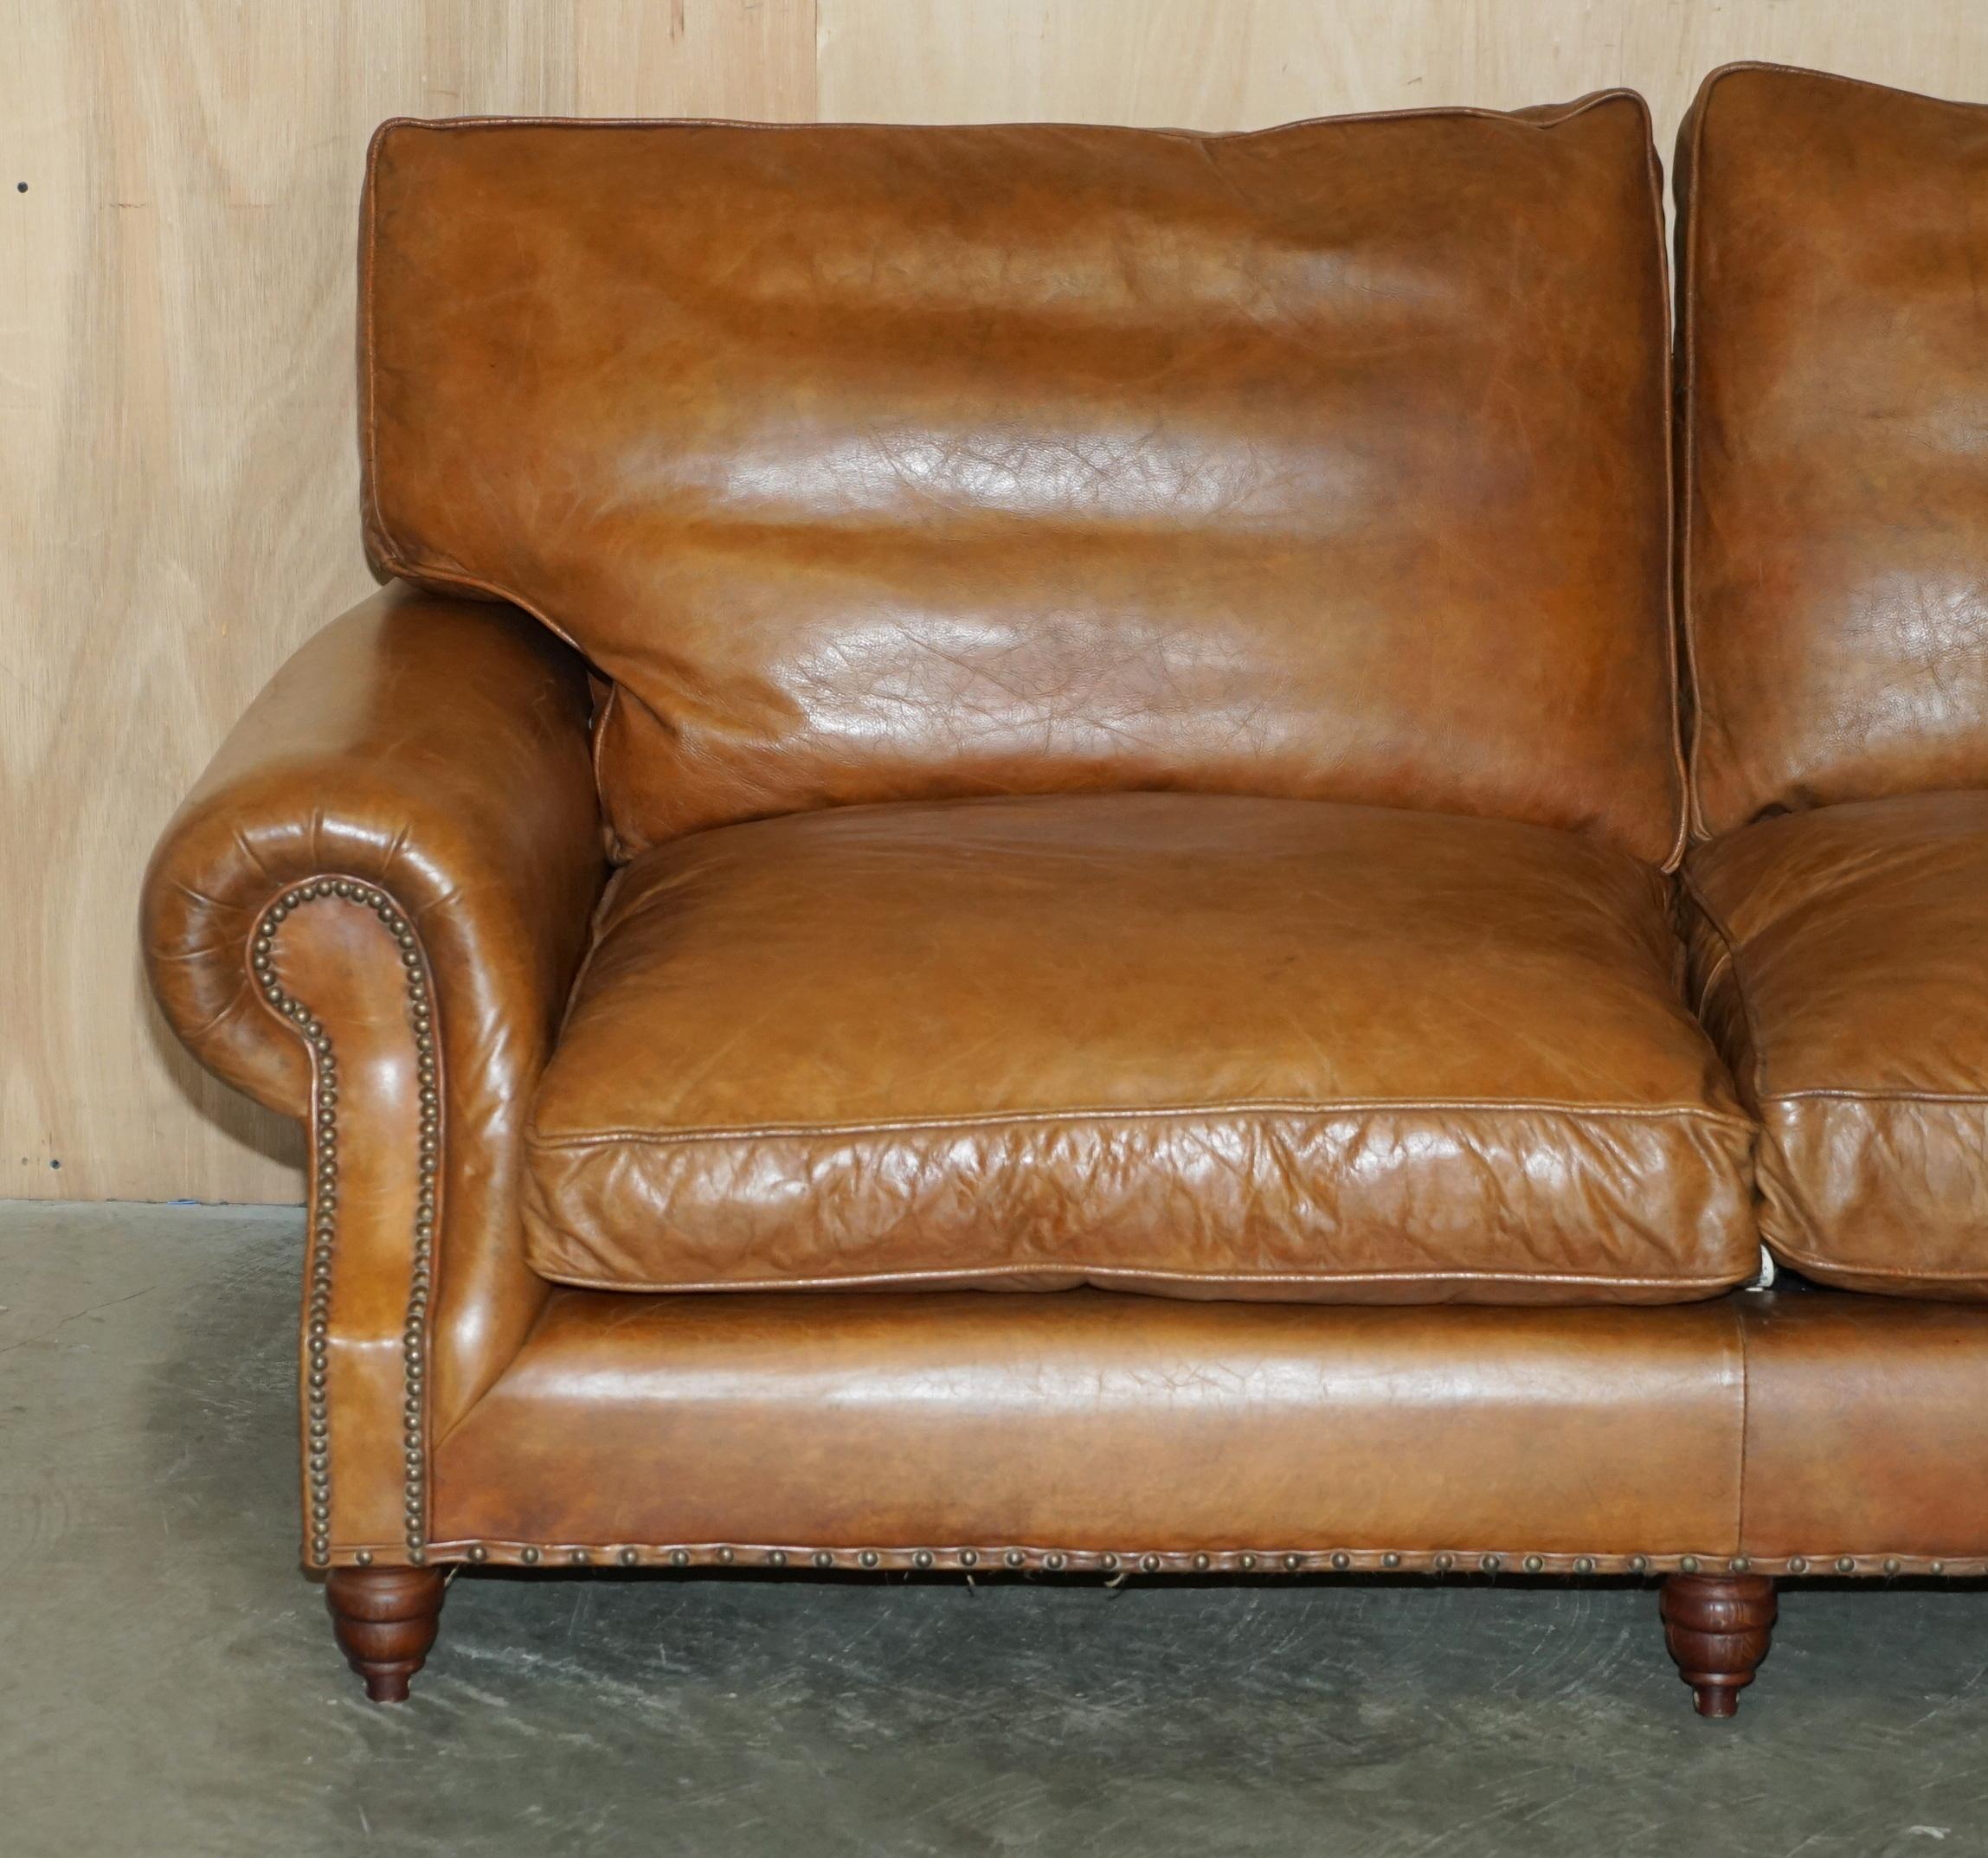 Country COLLECTABLE TIMOTHY OULTON DESIGNER HERiTAGE BROWN LEATHER BALMORAL SOFA For Sale